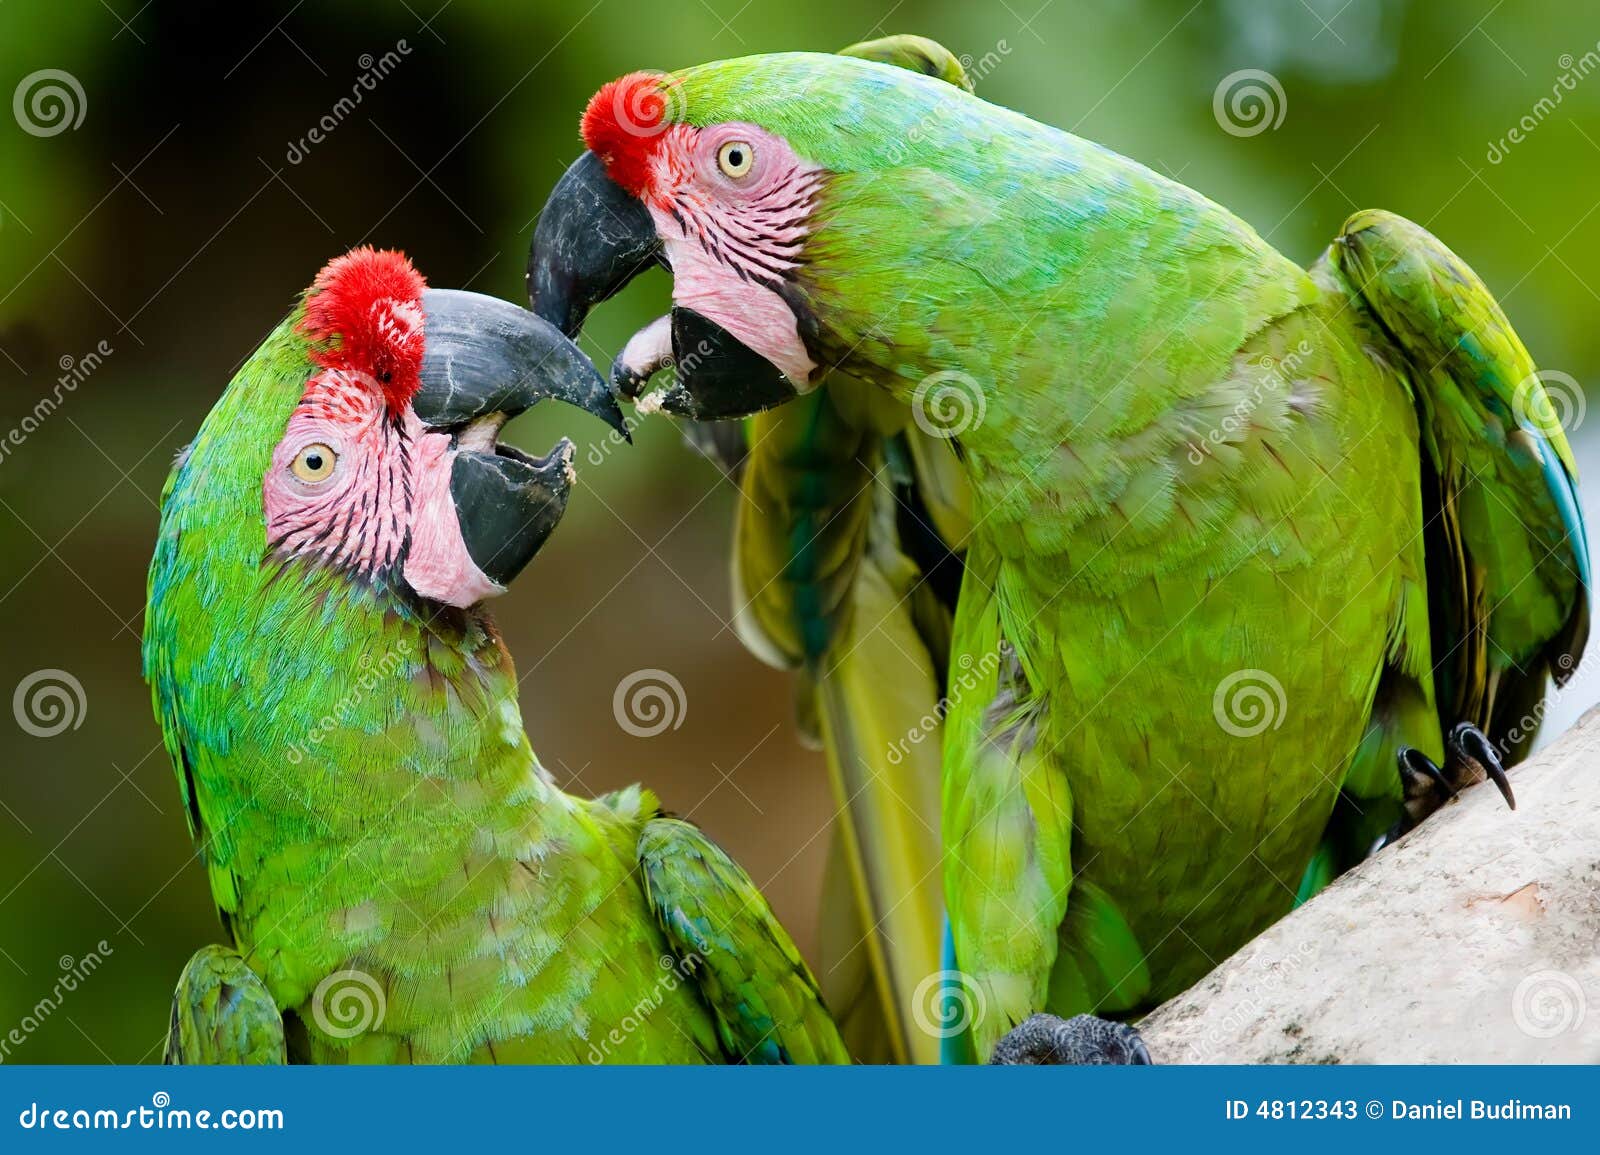 a pair of military macaws